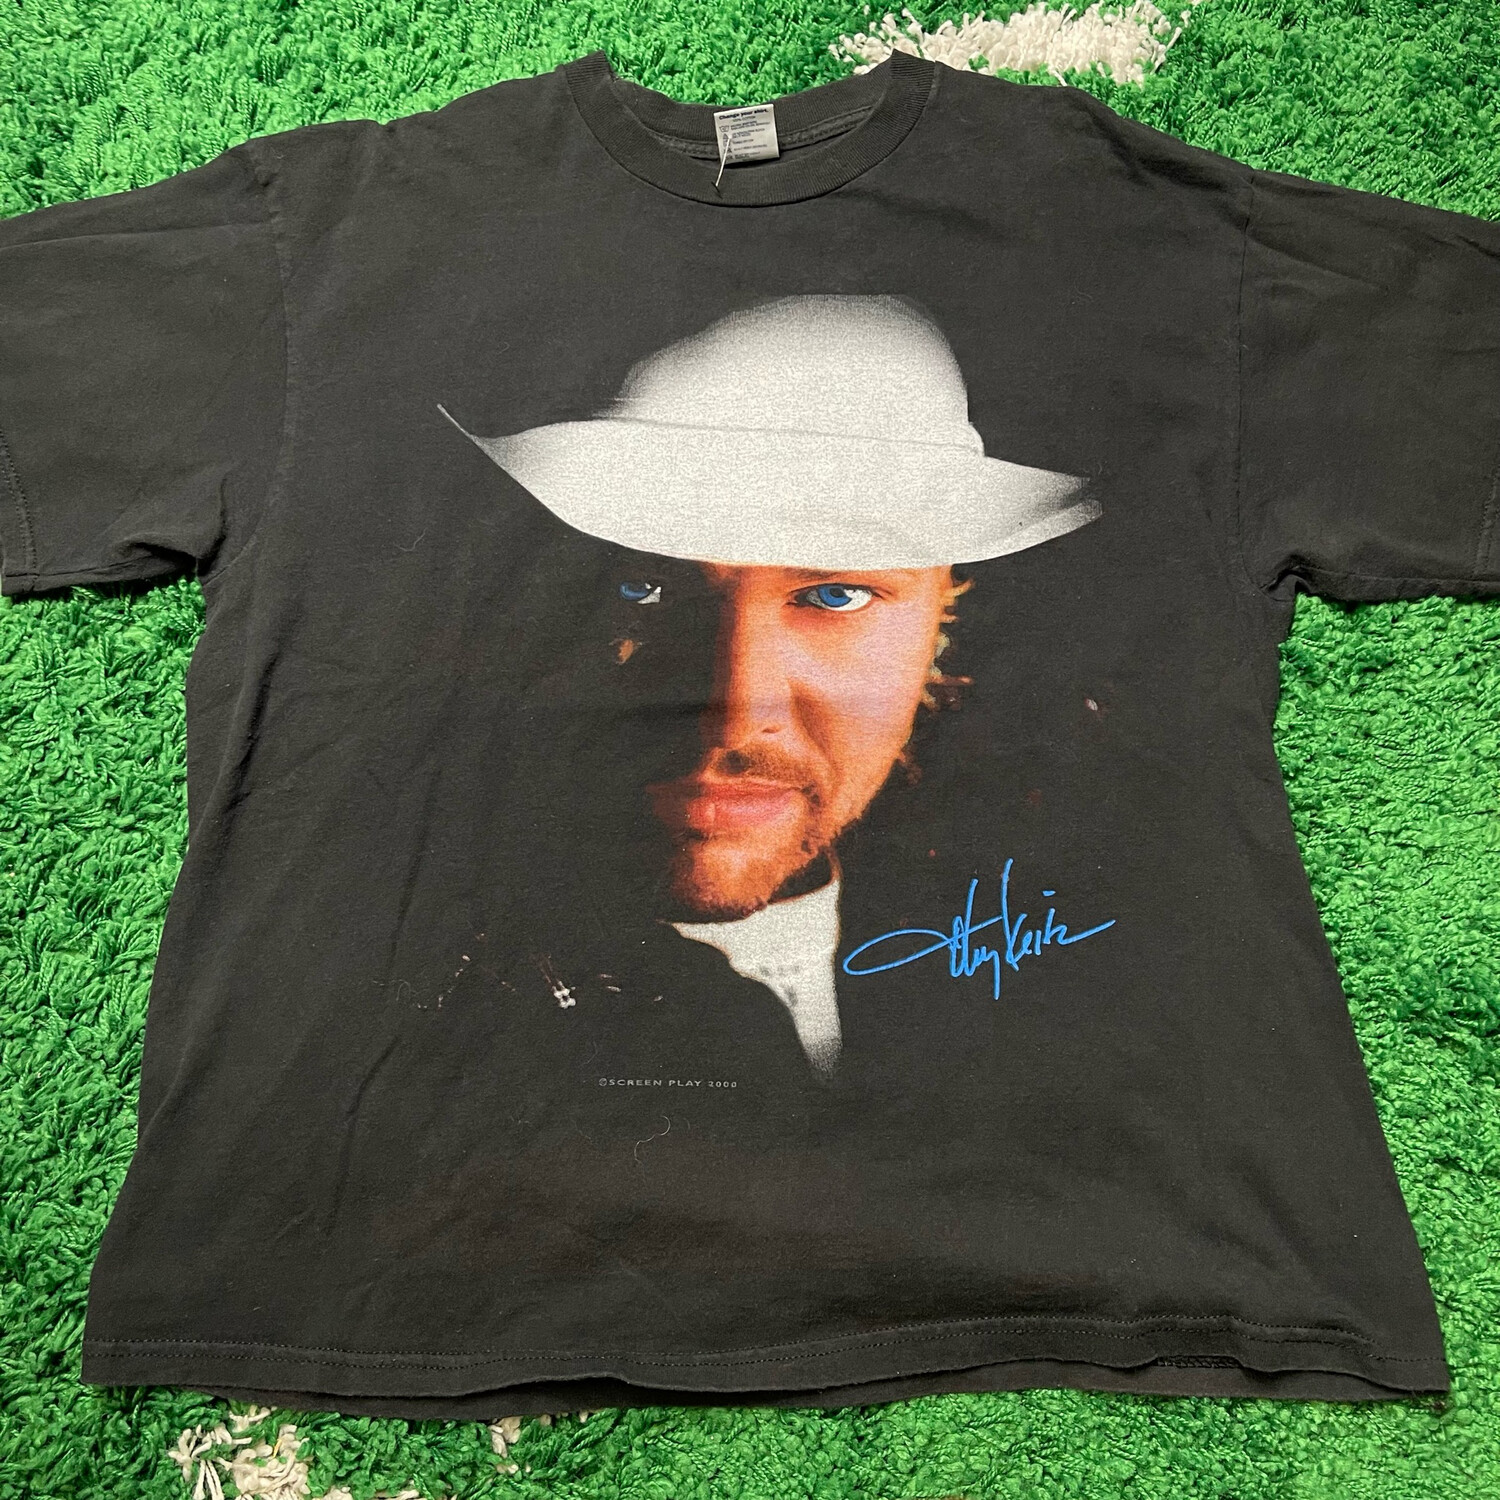 Toby Keith How Do You Like Me Now? 2000 Size XL